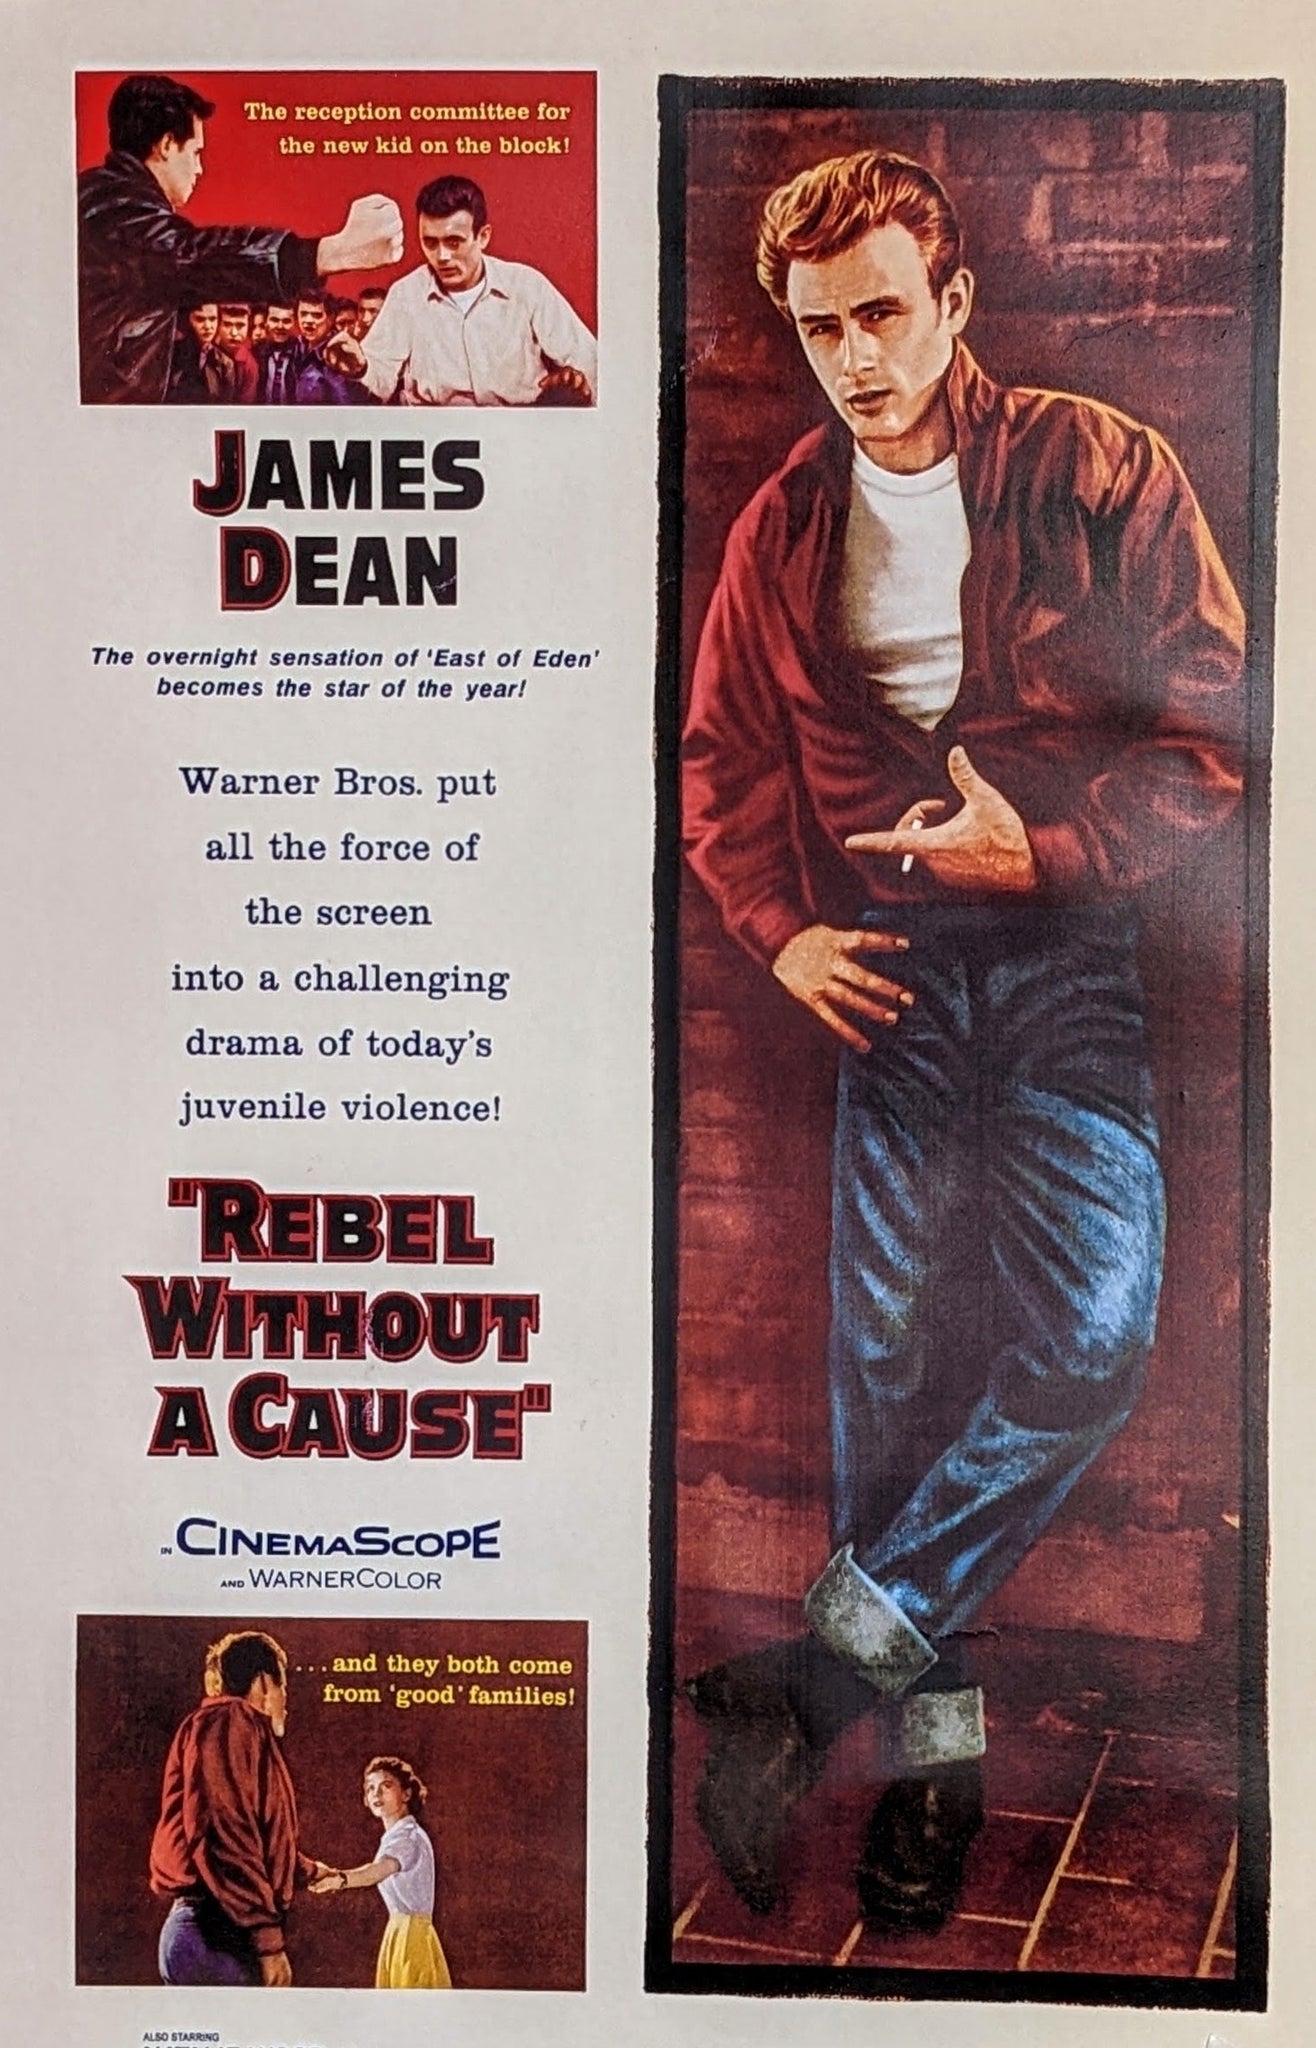 Rebel Without a Cause staring James Dean, Movie Poster